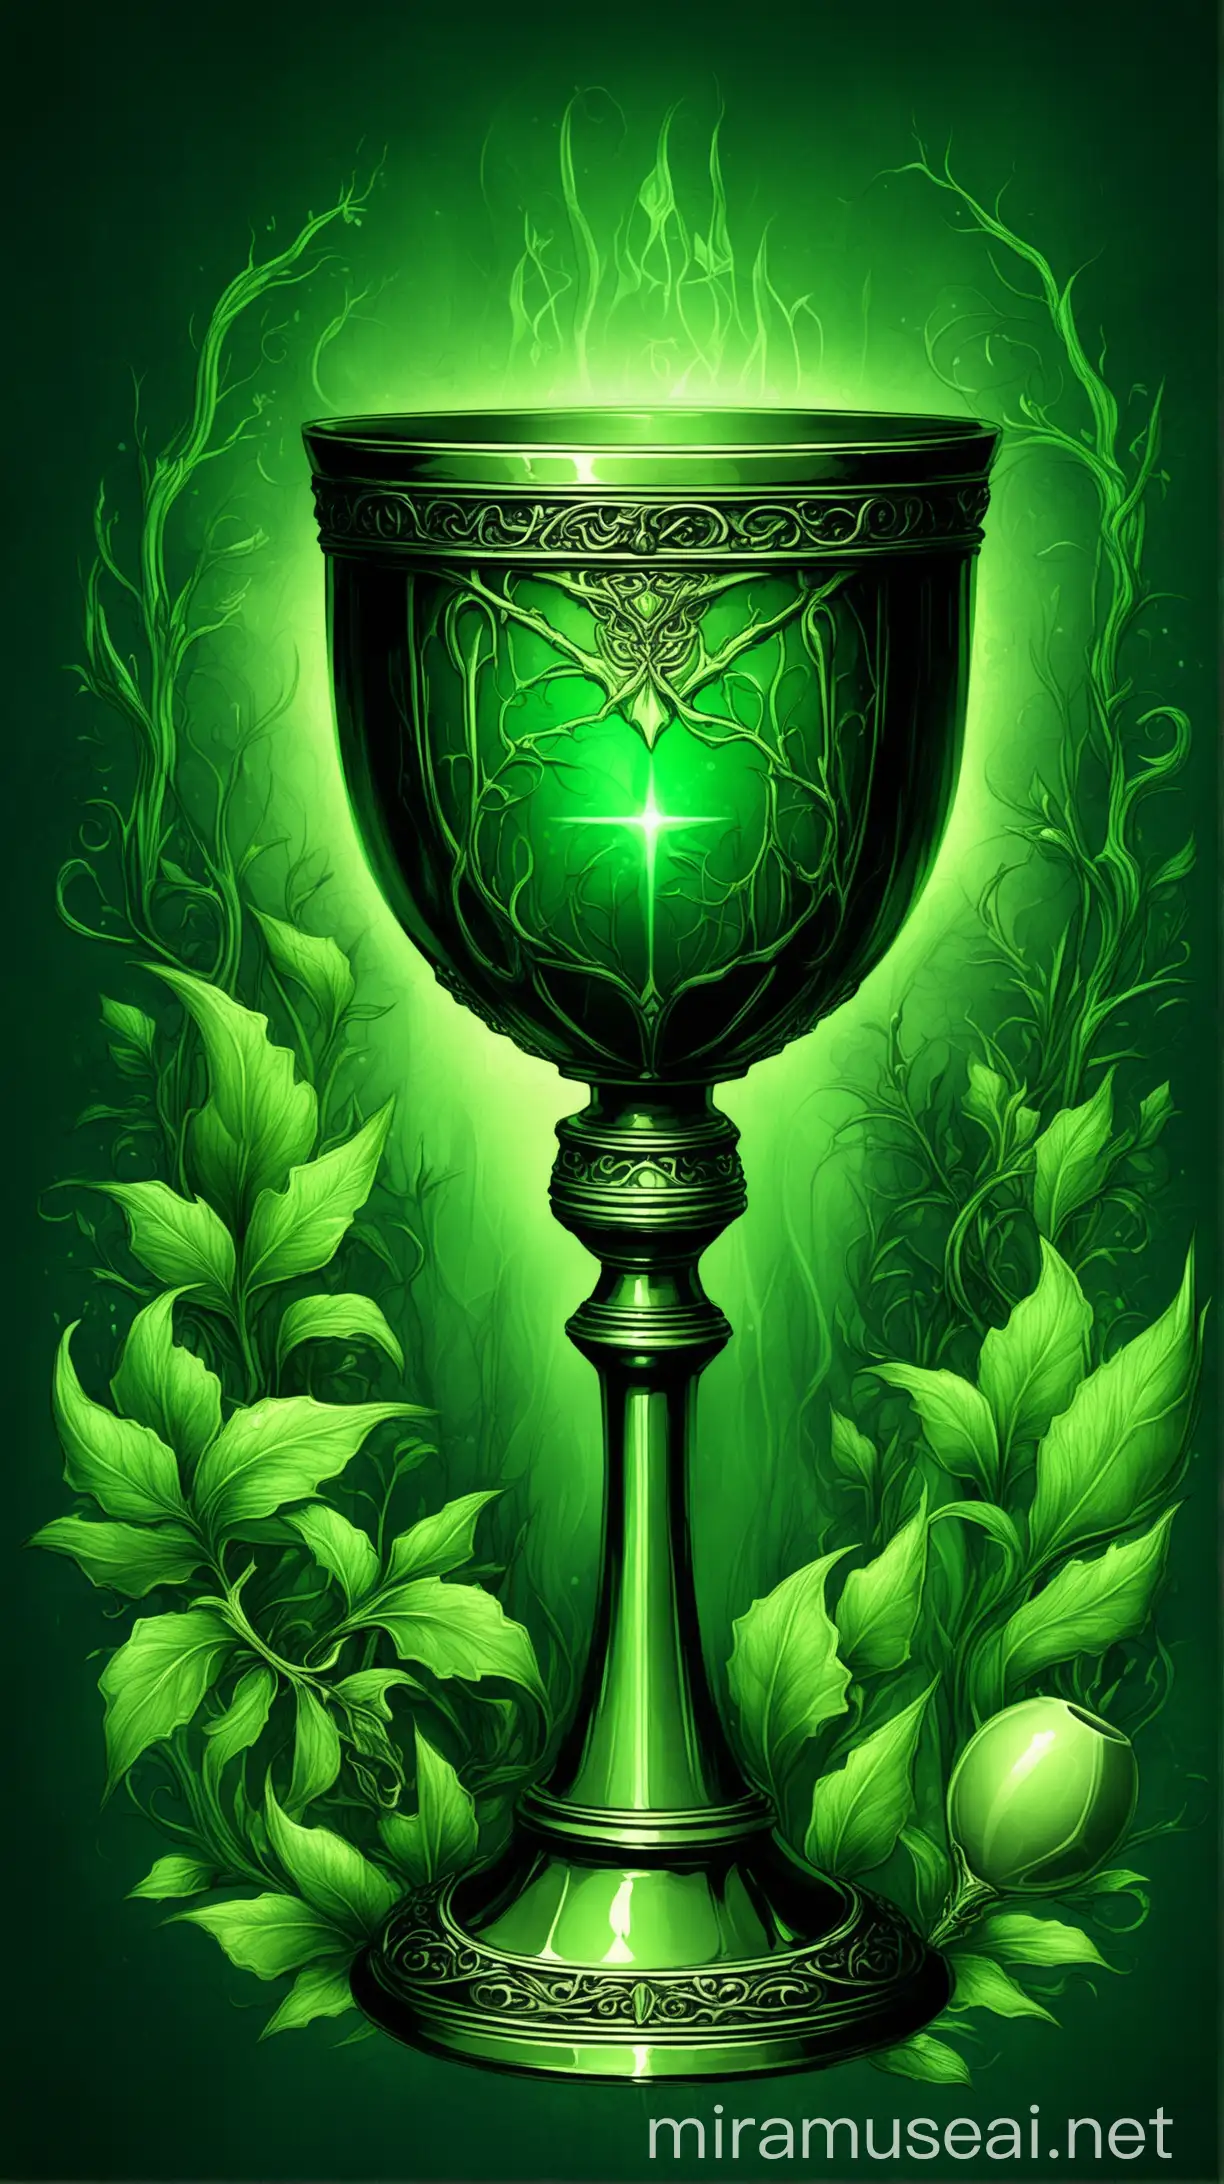 beautiful detailed goblet on a green background. Mystical green adds treachery